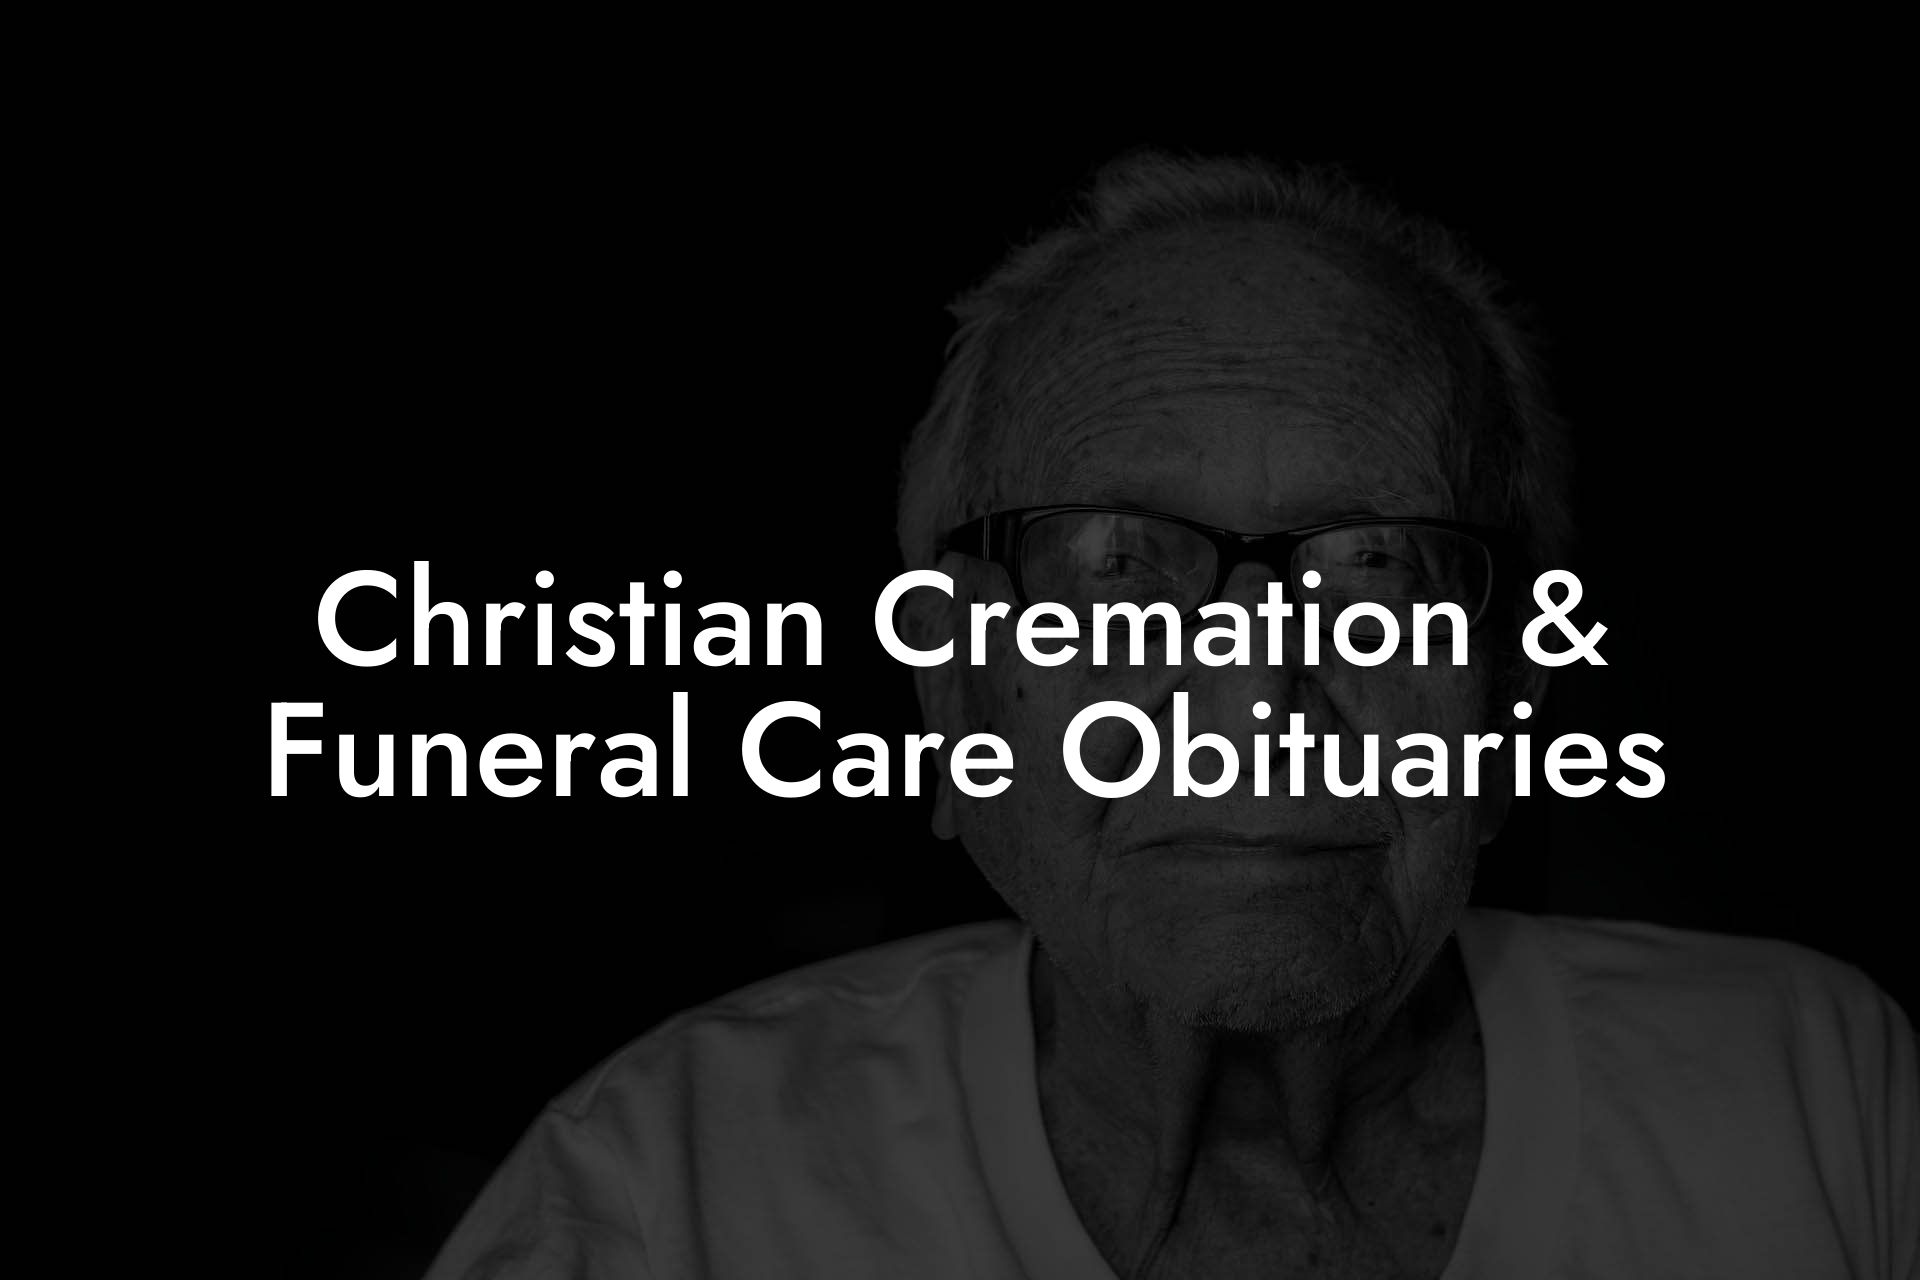 Christian Cremation & Funeral Care Obituaries